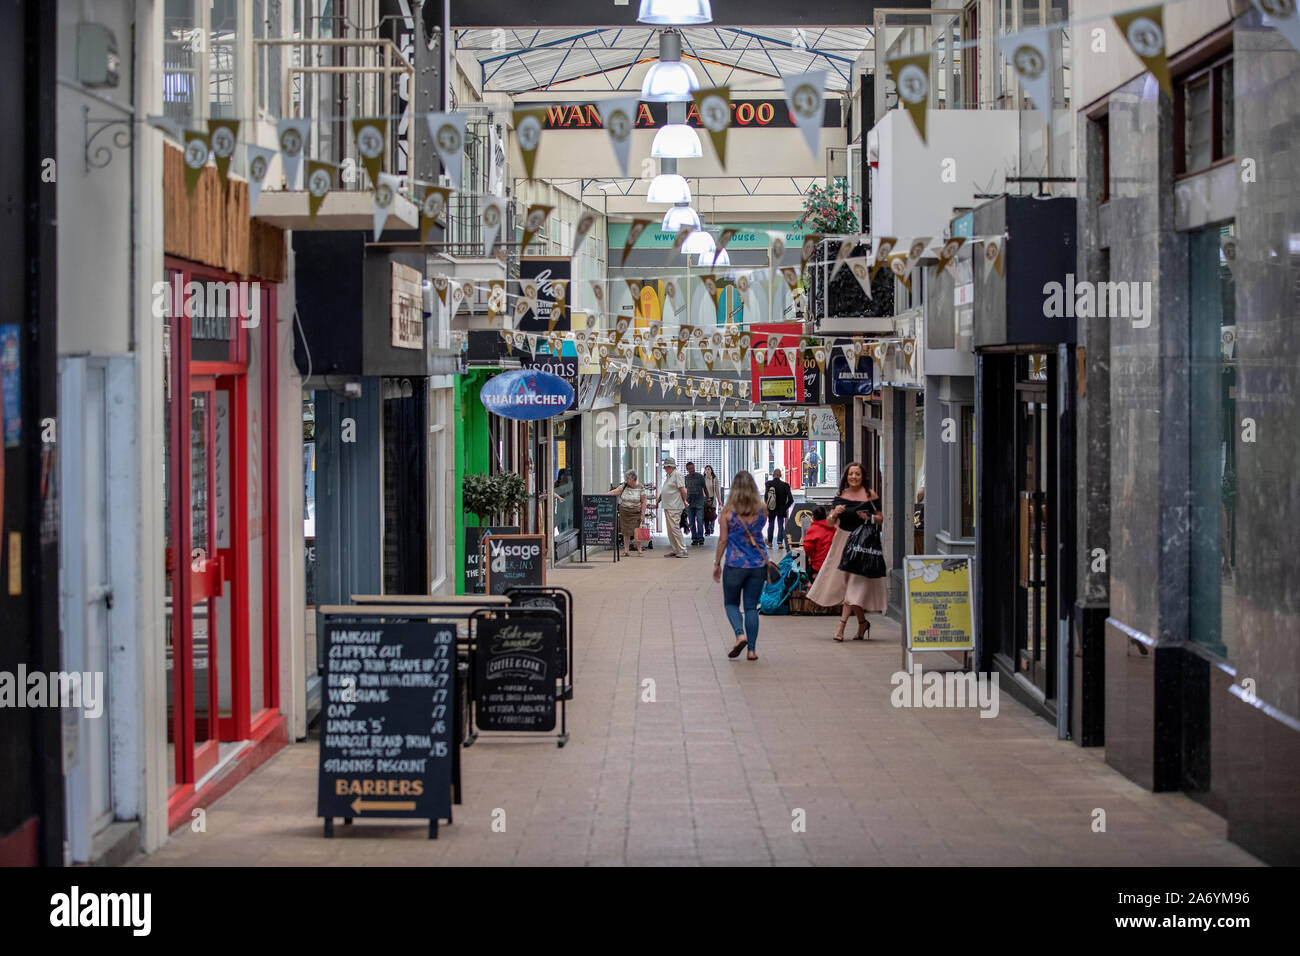 Pictured: A general view of Picton Arcade in Swansea city centre, Wales, UK.  Friday 12 July 2019  Re: General view of Swansea city centre, Wales, UK. Stock Photo